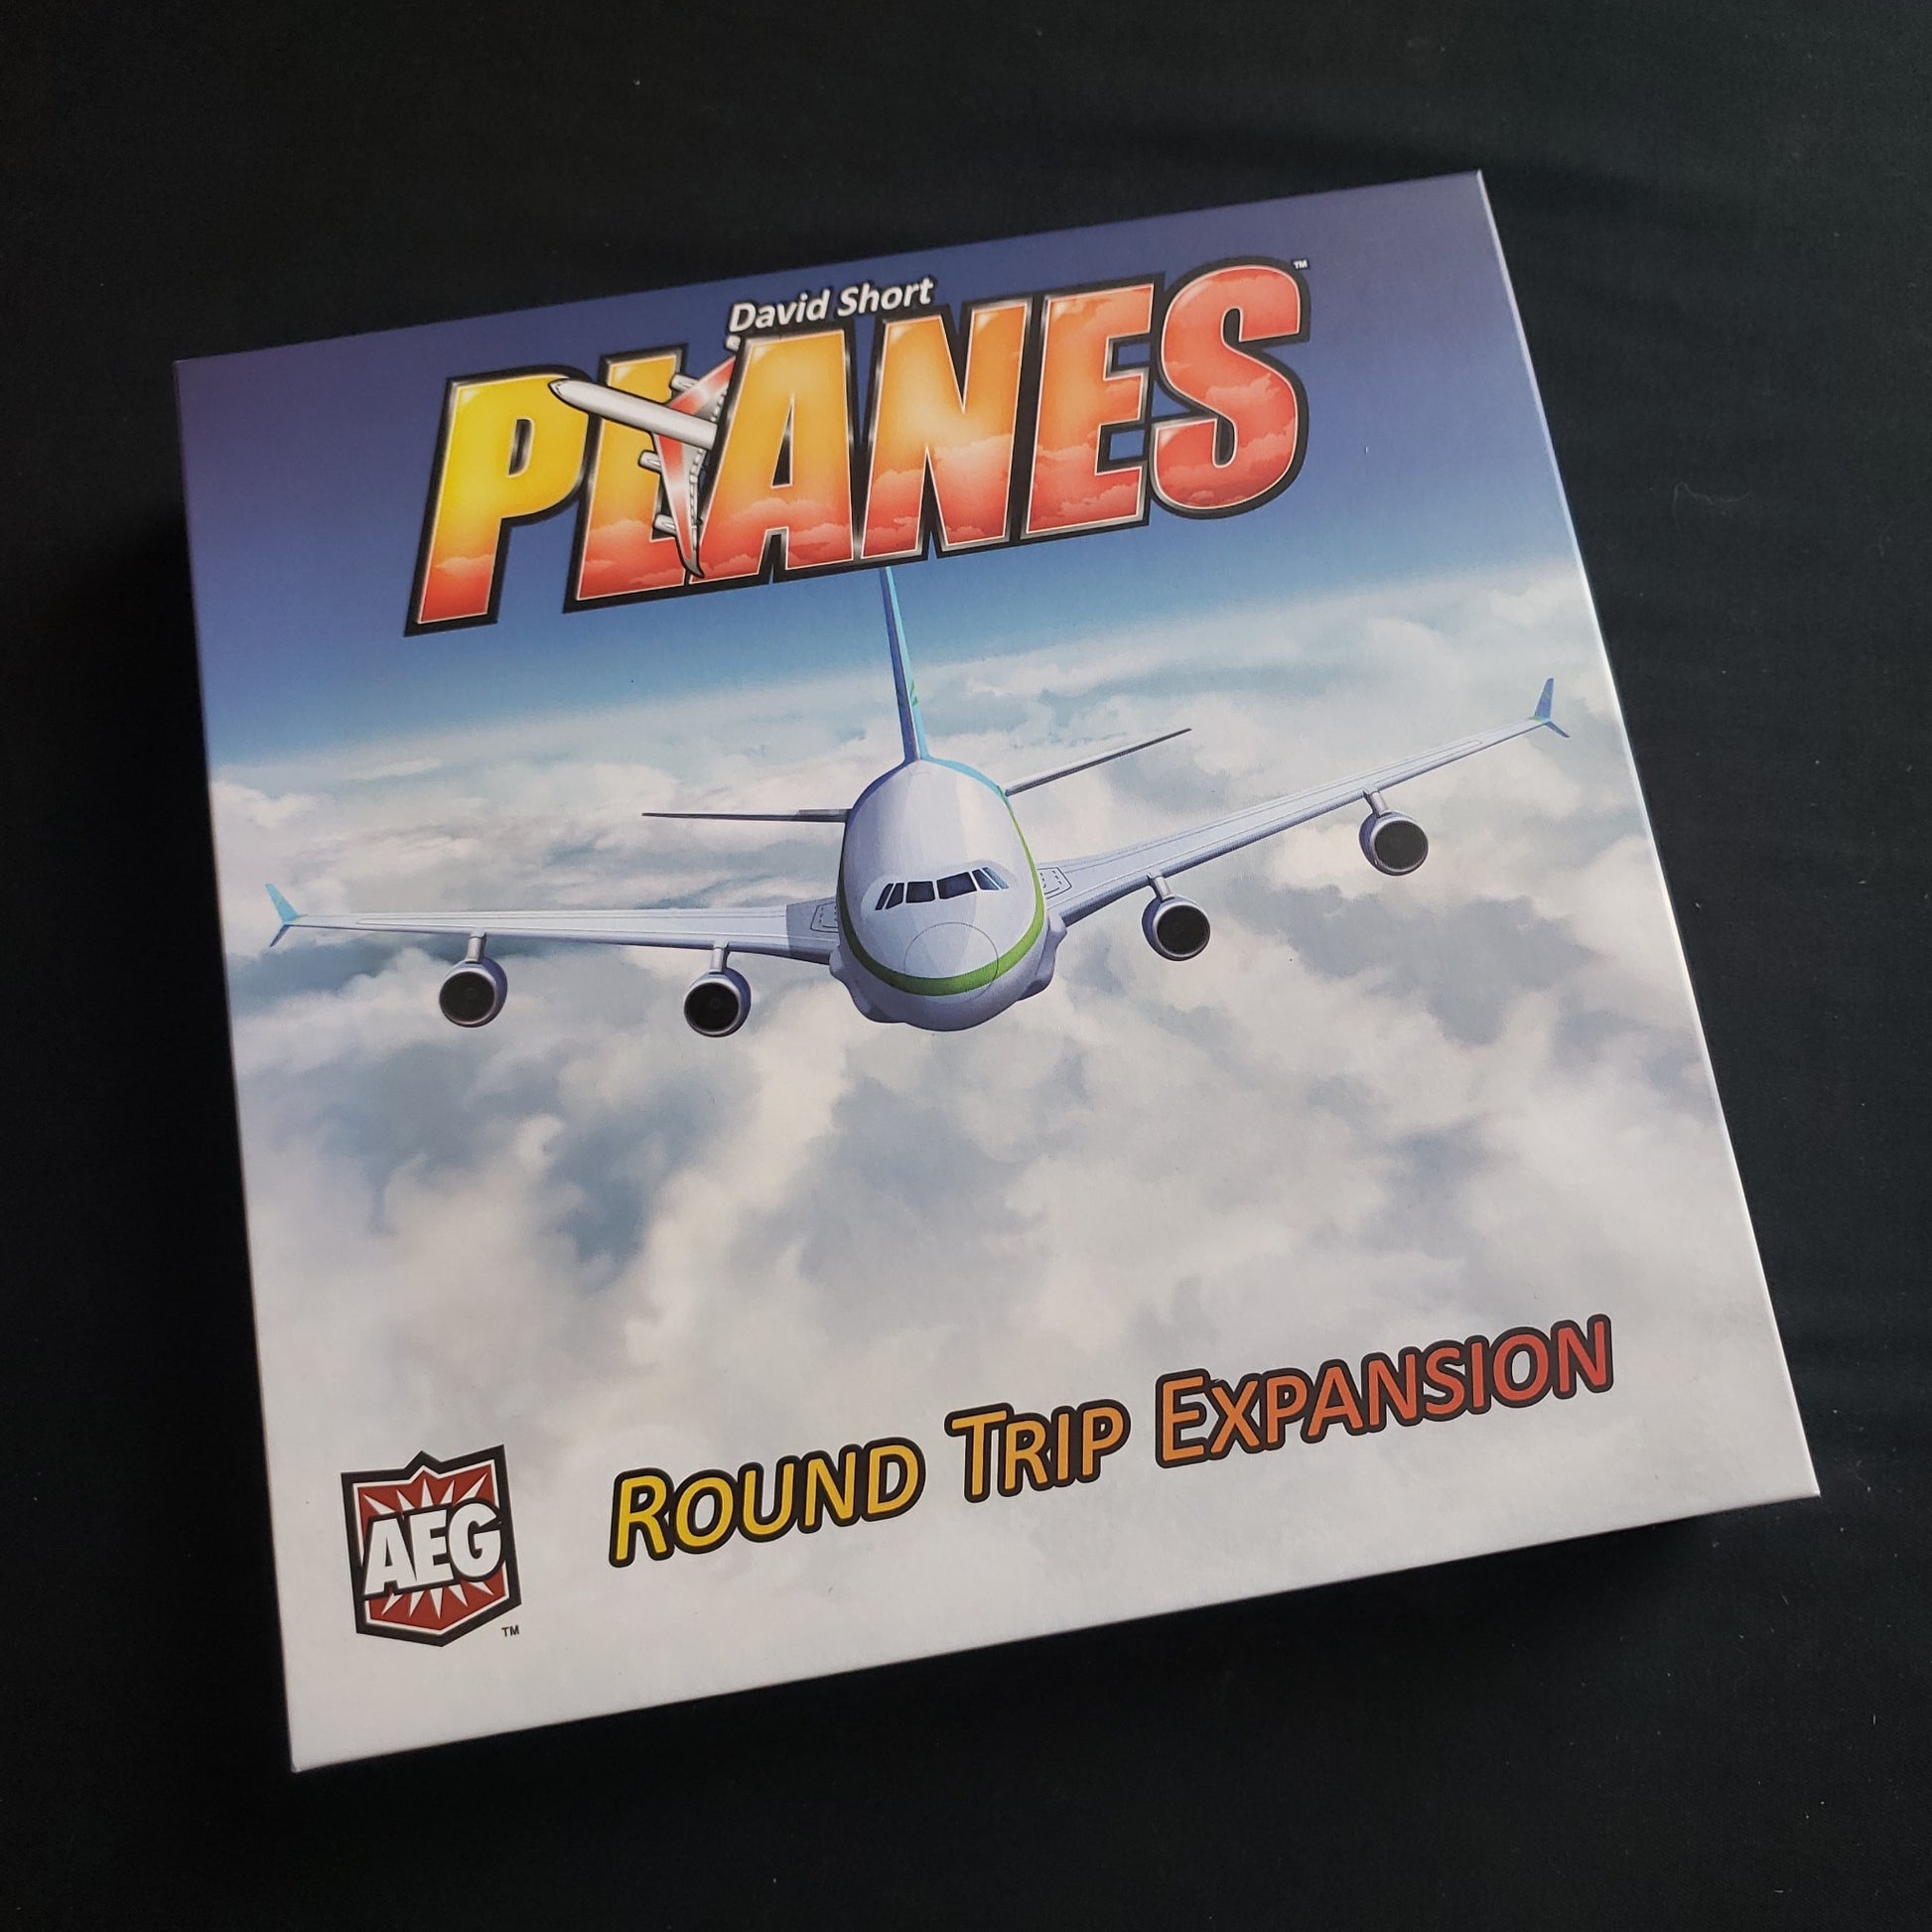 Image shows the front cover of the box of the Round Trip expansion for the Planes board game